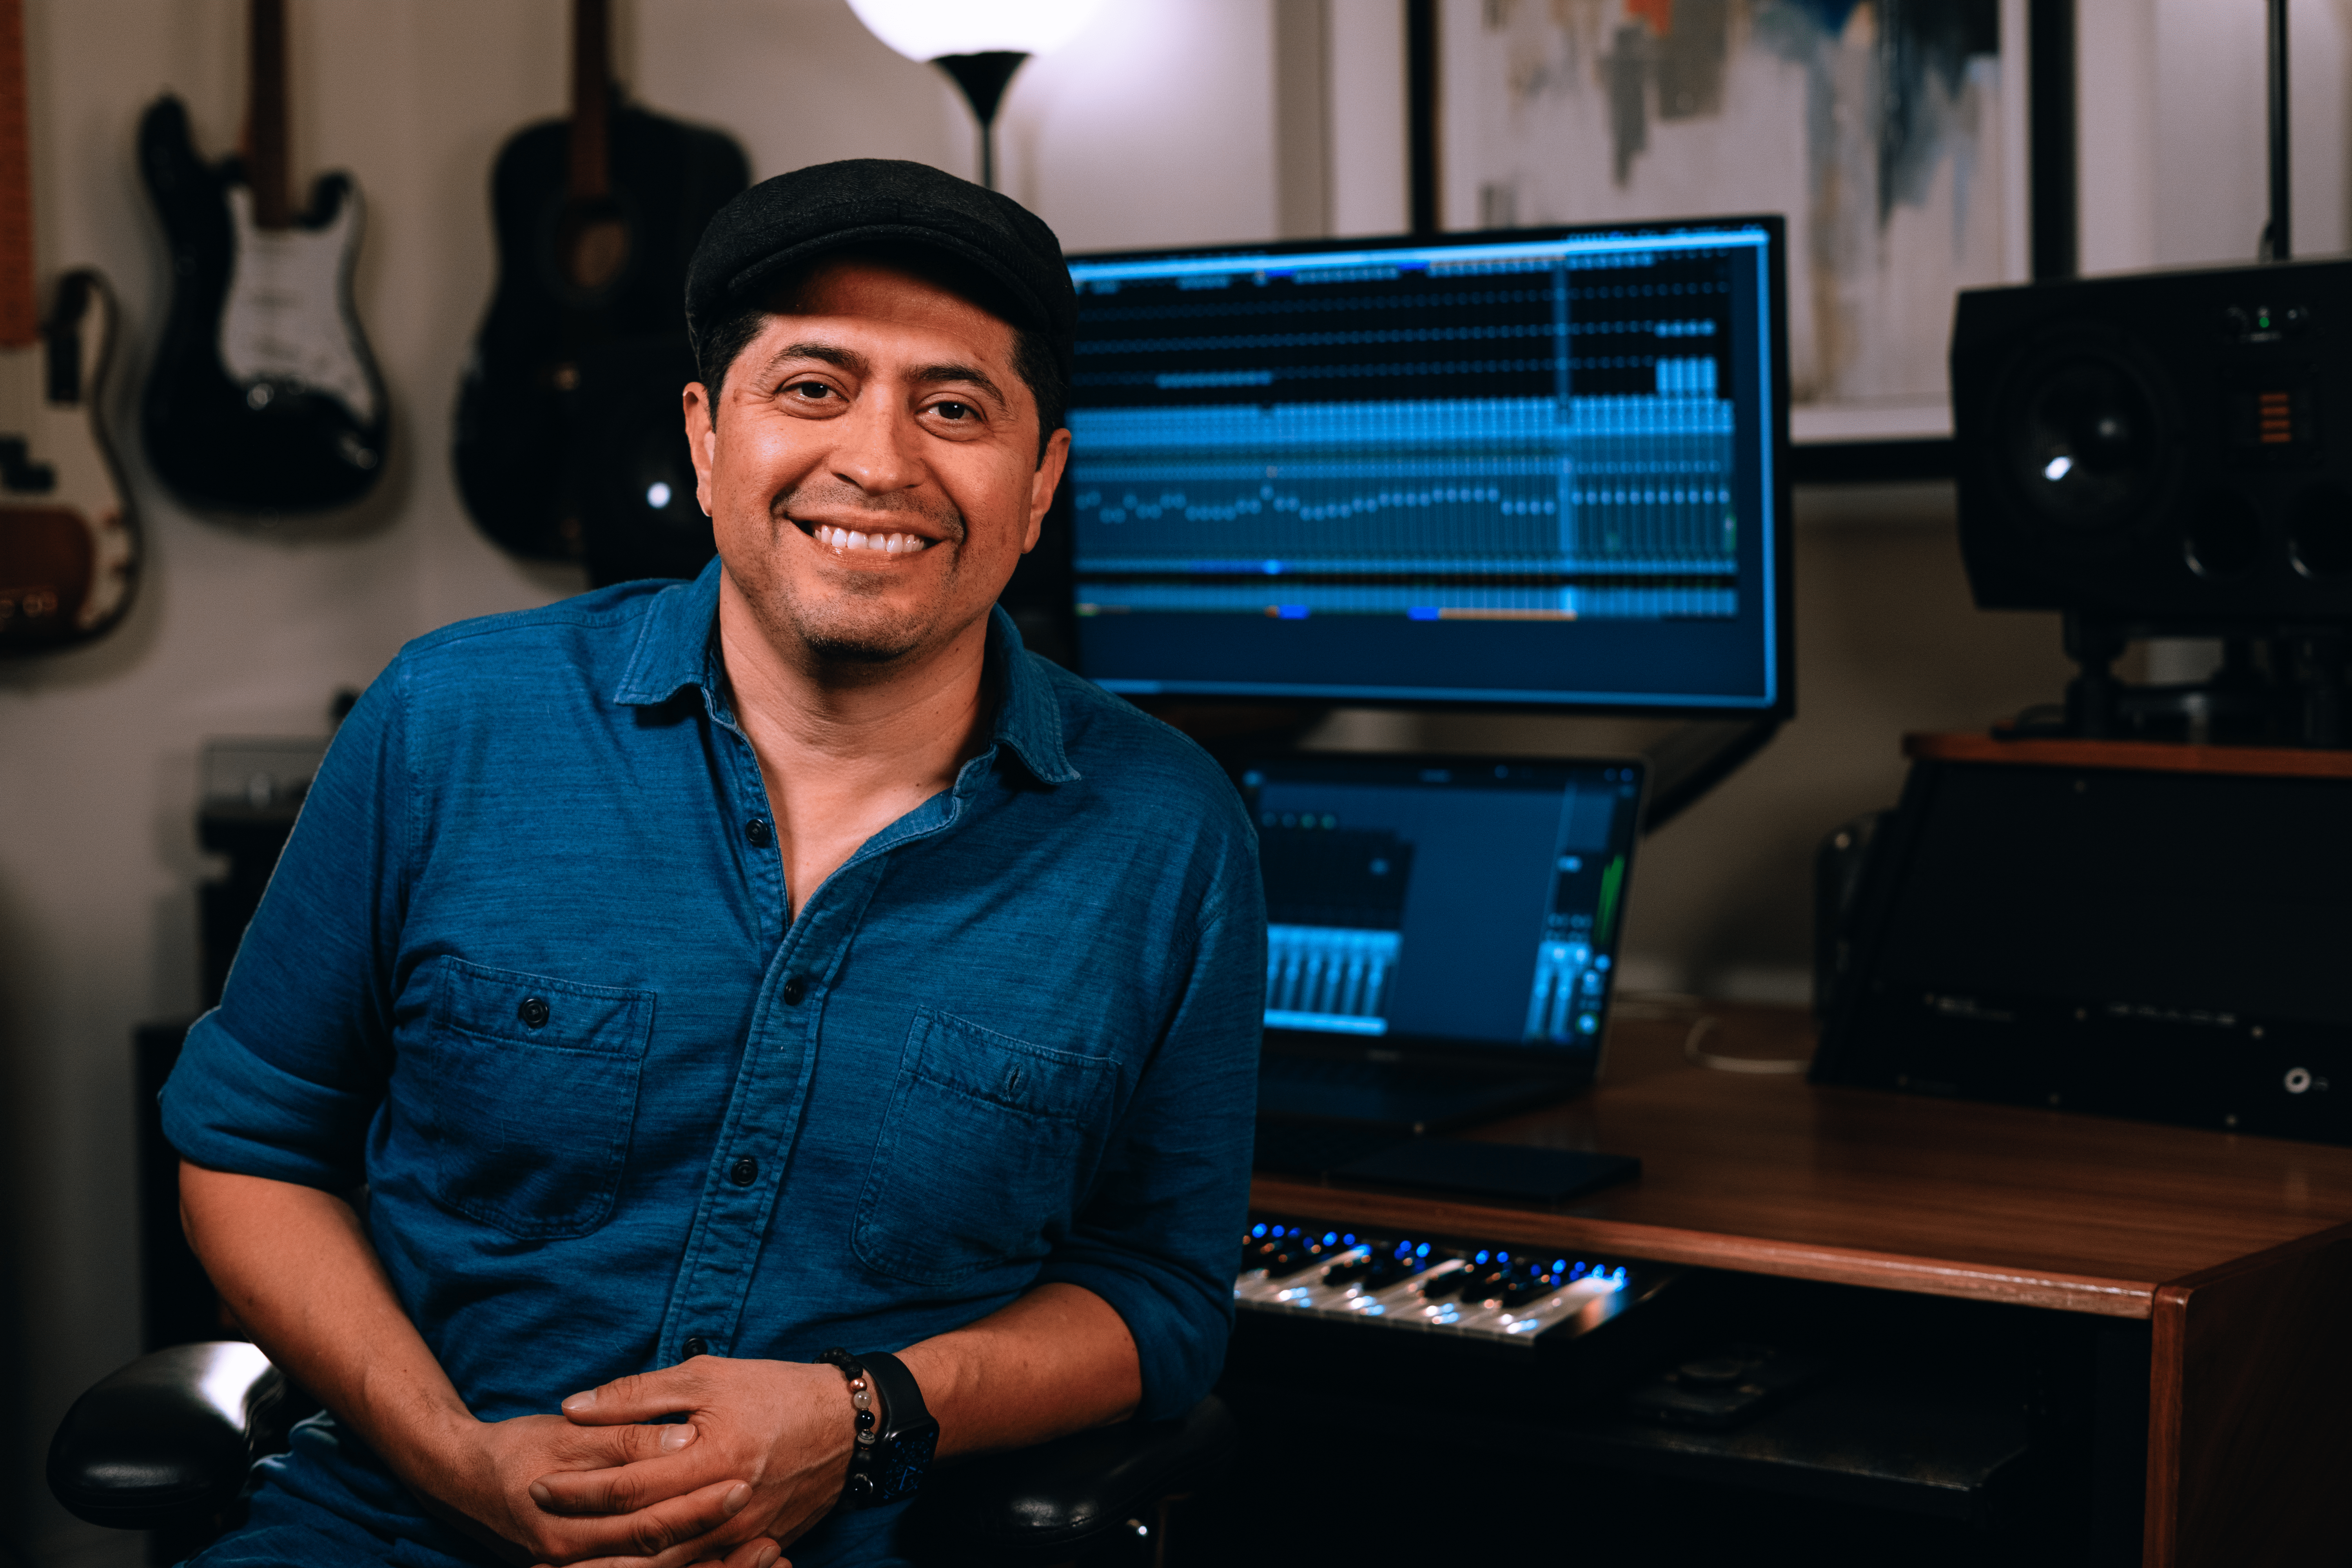 Songwriter, producer, and engineer Miguel Soltero smiles as he sits in his studio with guitars in the background.